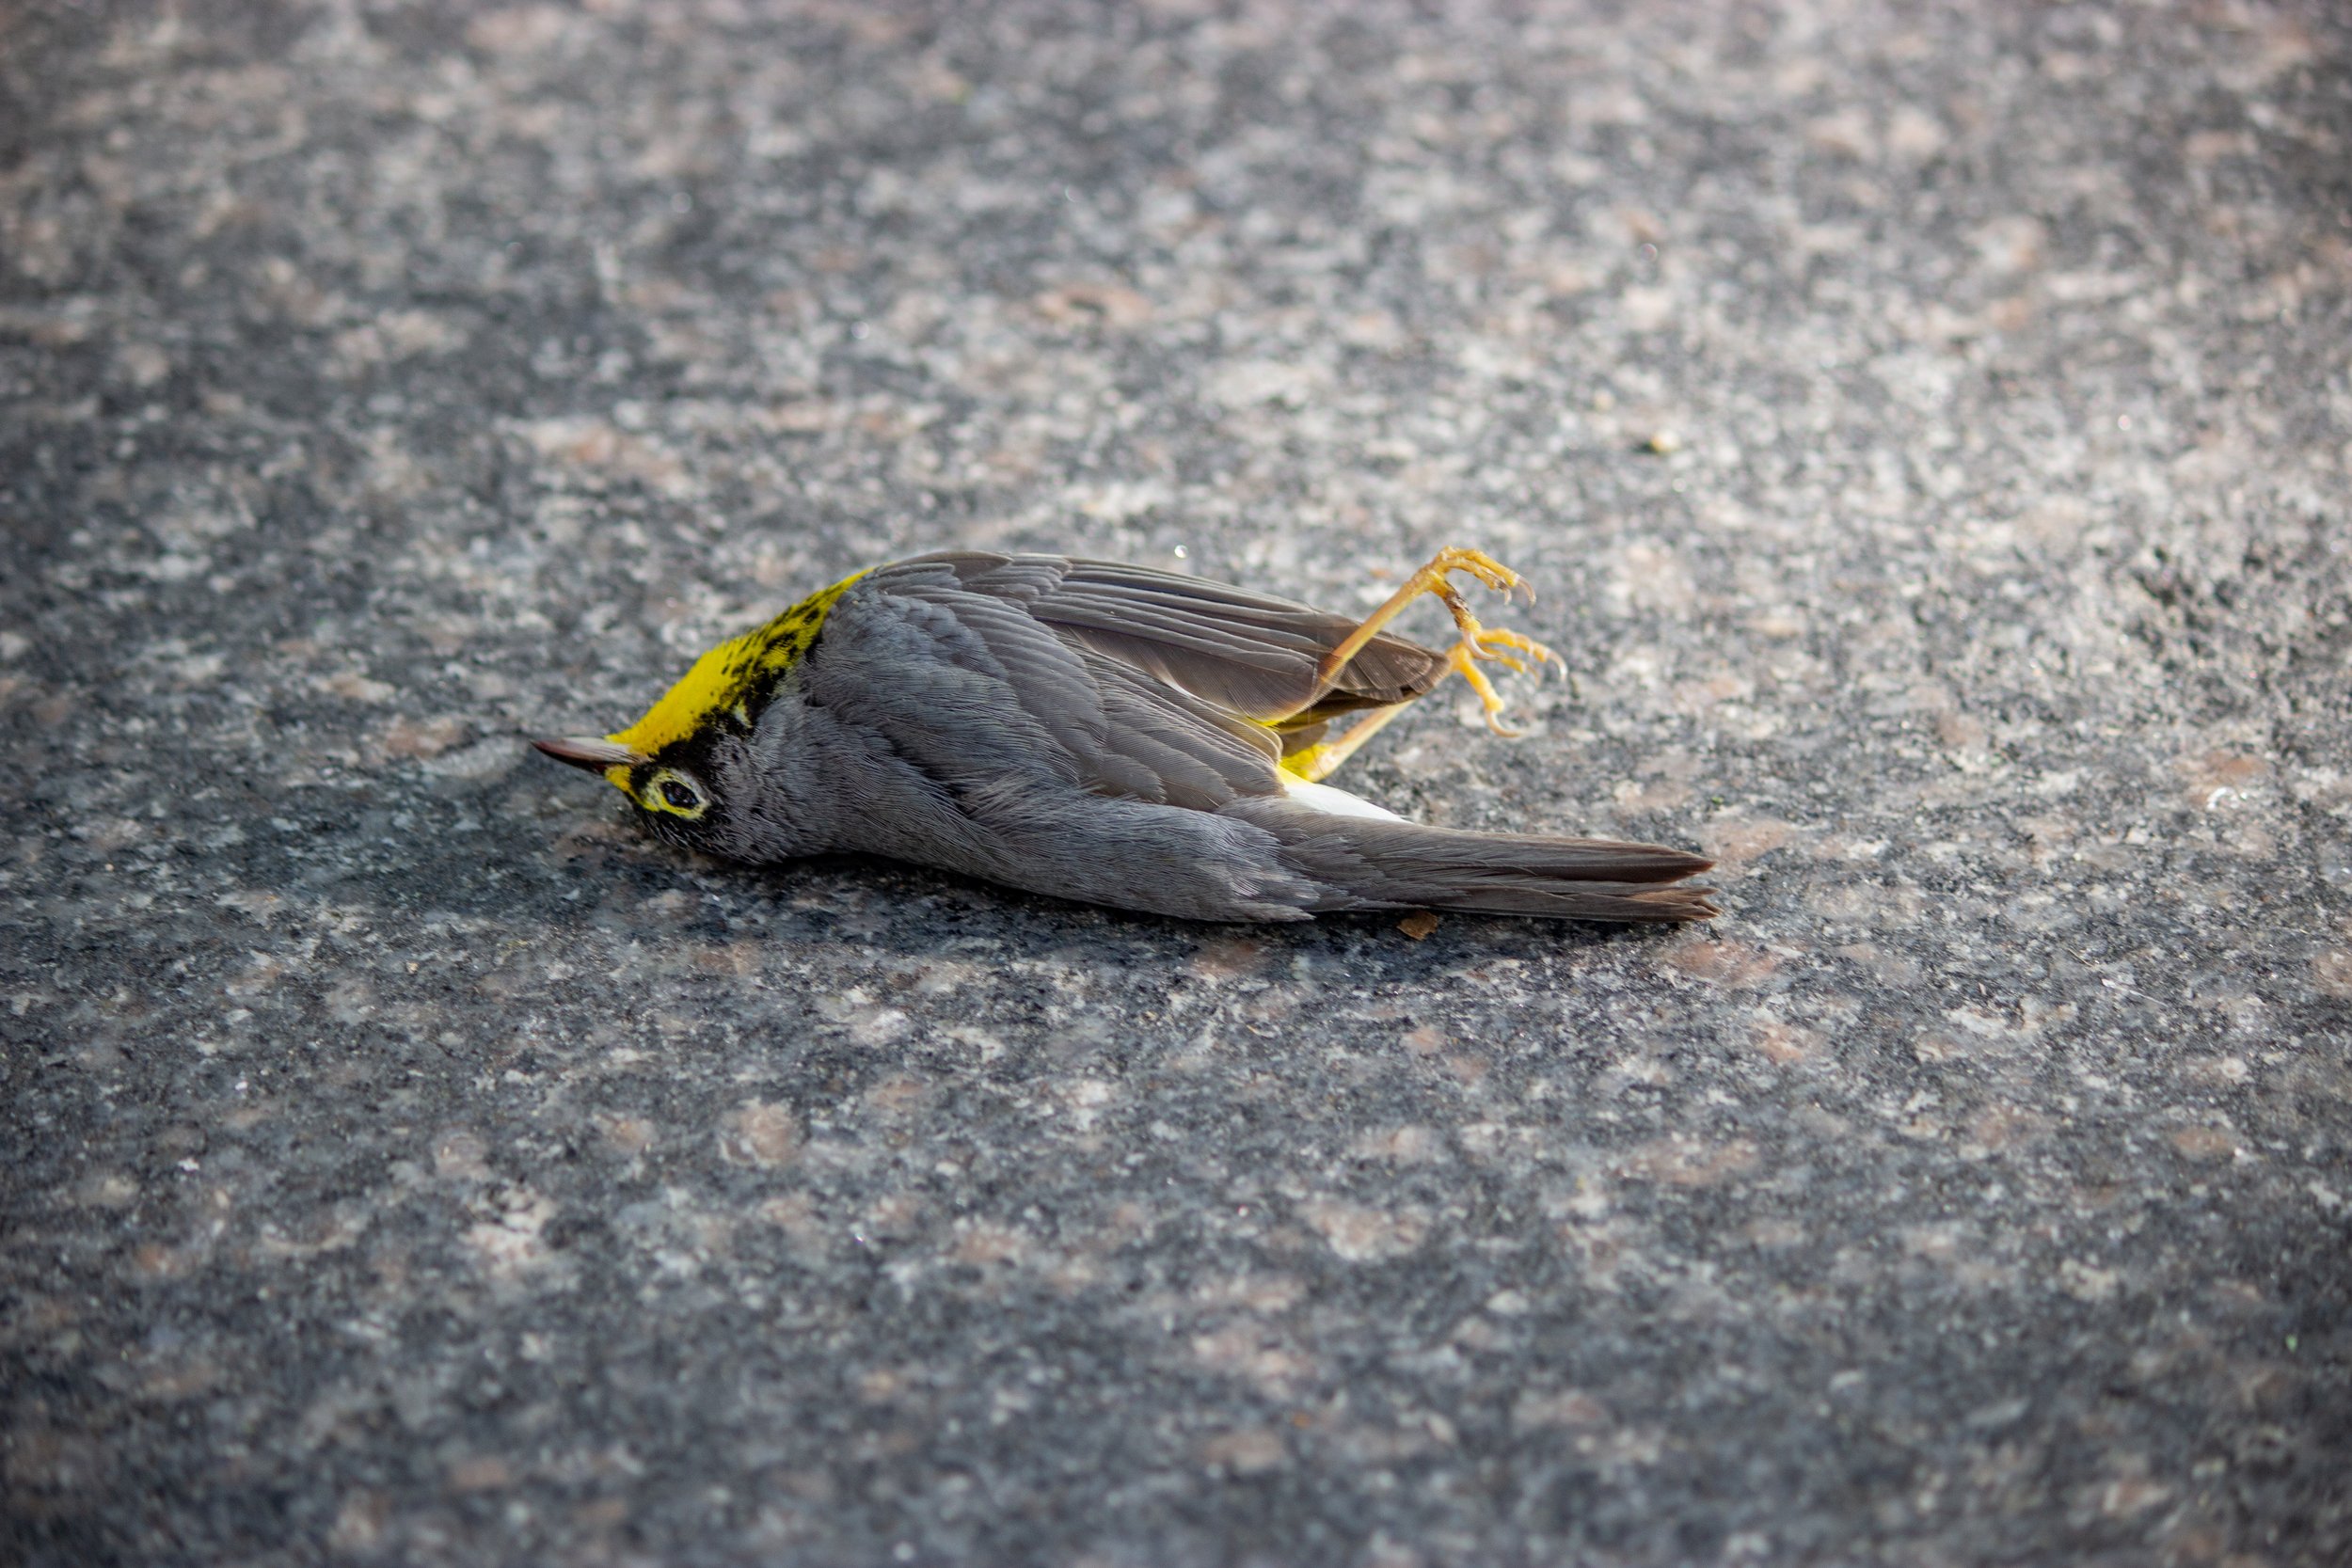  A dead warbler on the sidewalk in front of the Deutsche Bank Center on Tuesday May 16. The warbler likely collided with the windows of the building the night before during migration. The buildings proximity to the park and the reflections of the tre